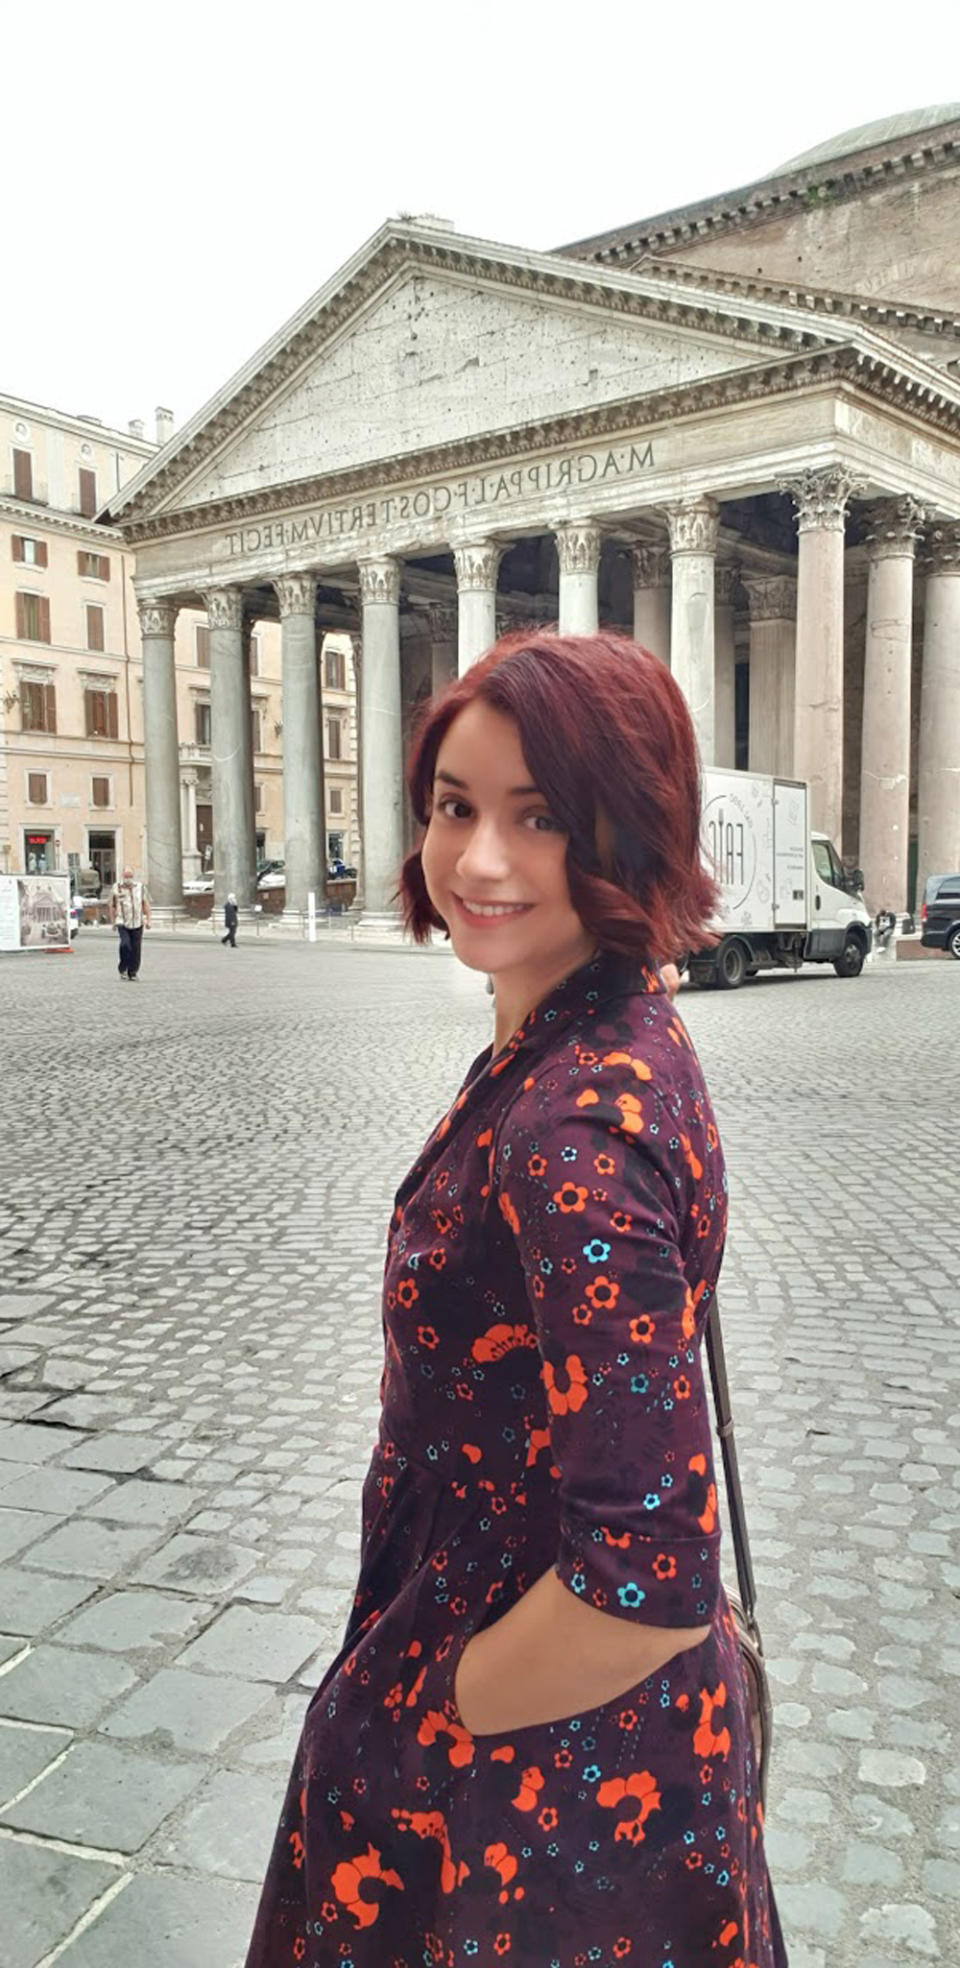 Habiba visiting the Pantheon in Rome during one of her house-swaps (Collect/PA Real Life)